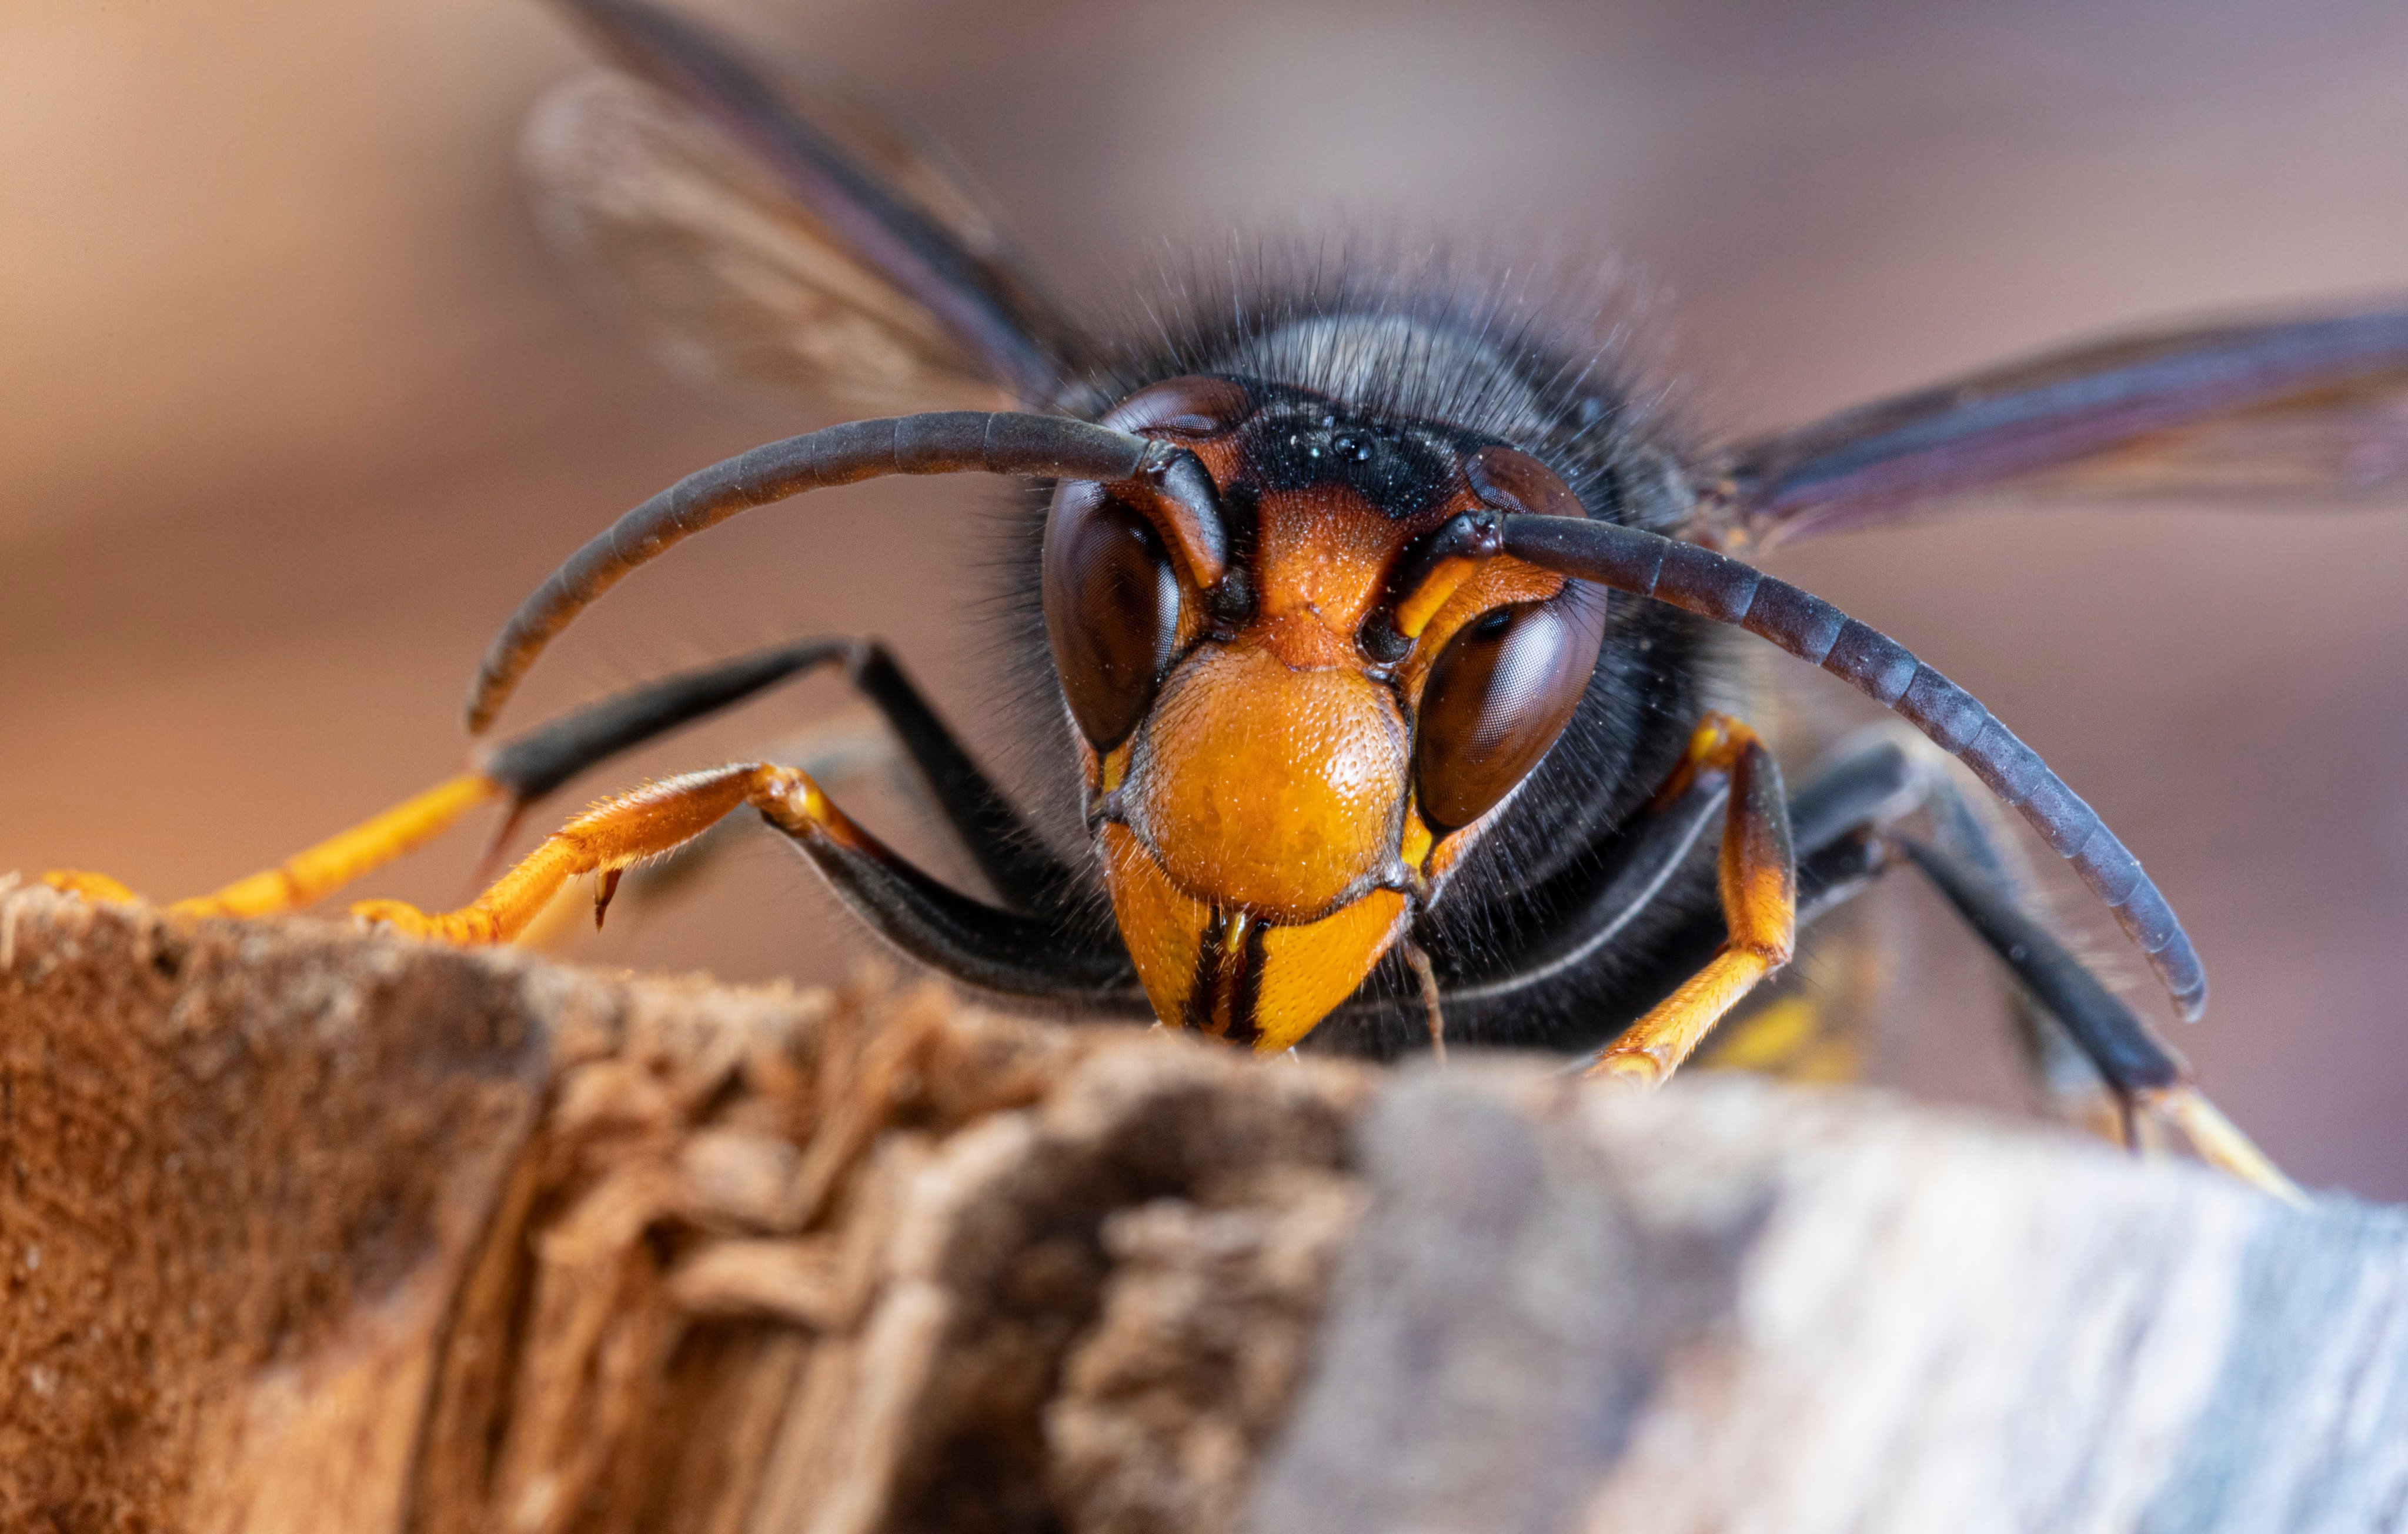 Asian hornets, famous for their murderous destruction of bee colonies, have started appearing in Britain. Cliff Buddle, who watched an attack in Hong Kong, and now lives in England, is on the alert. Photo: Getty Images